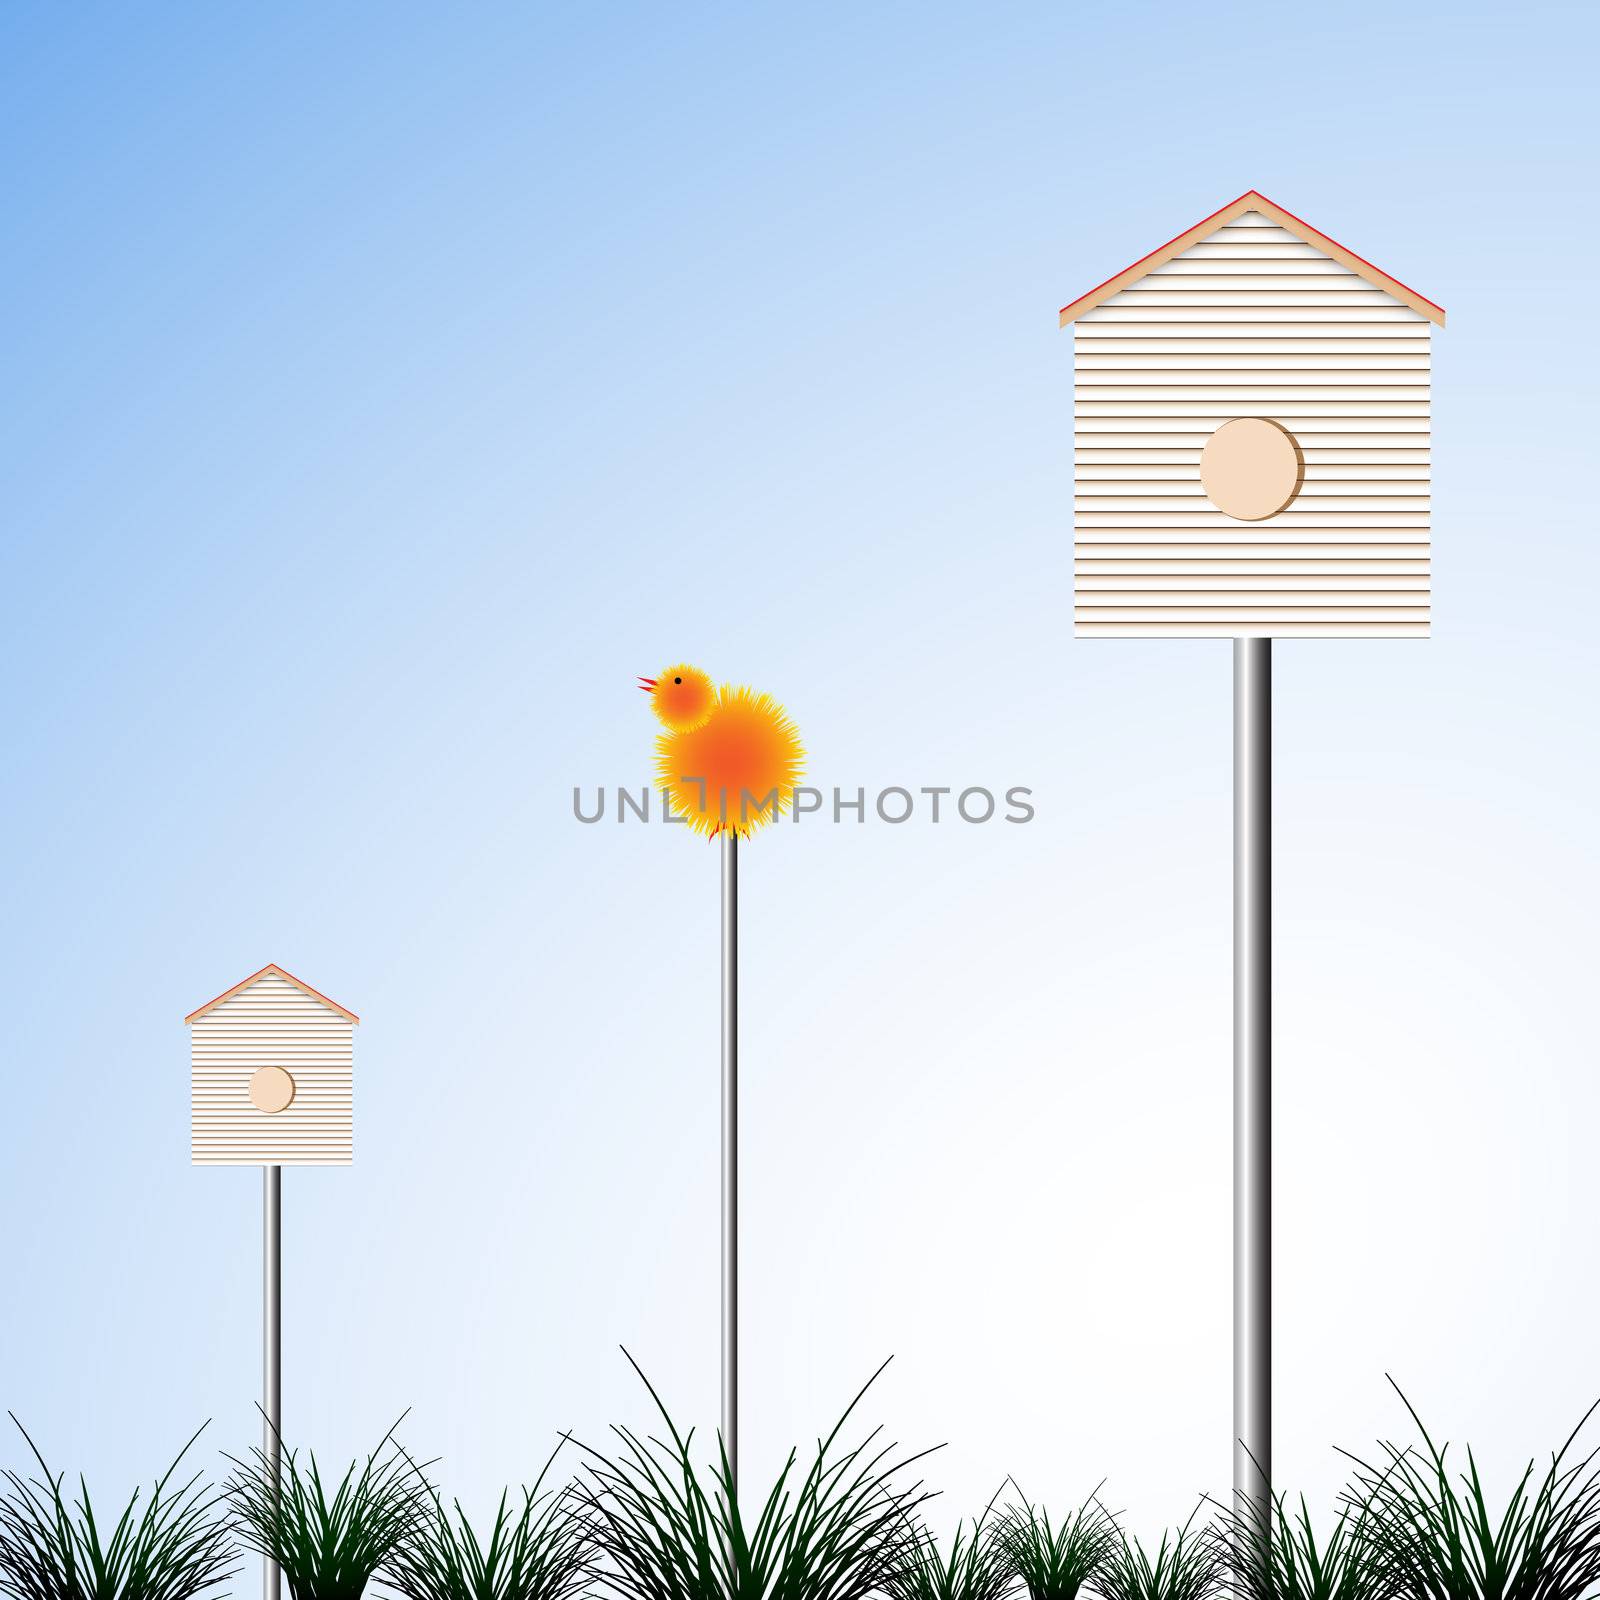 bird houses and grass, abstract vector art illustration; image contains transparency